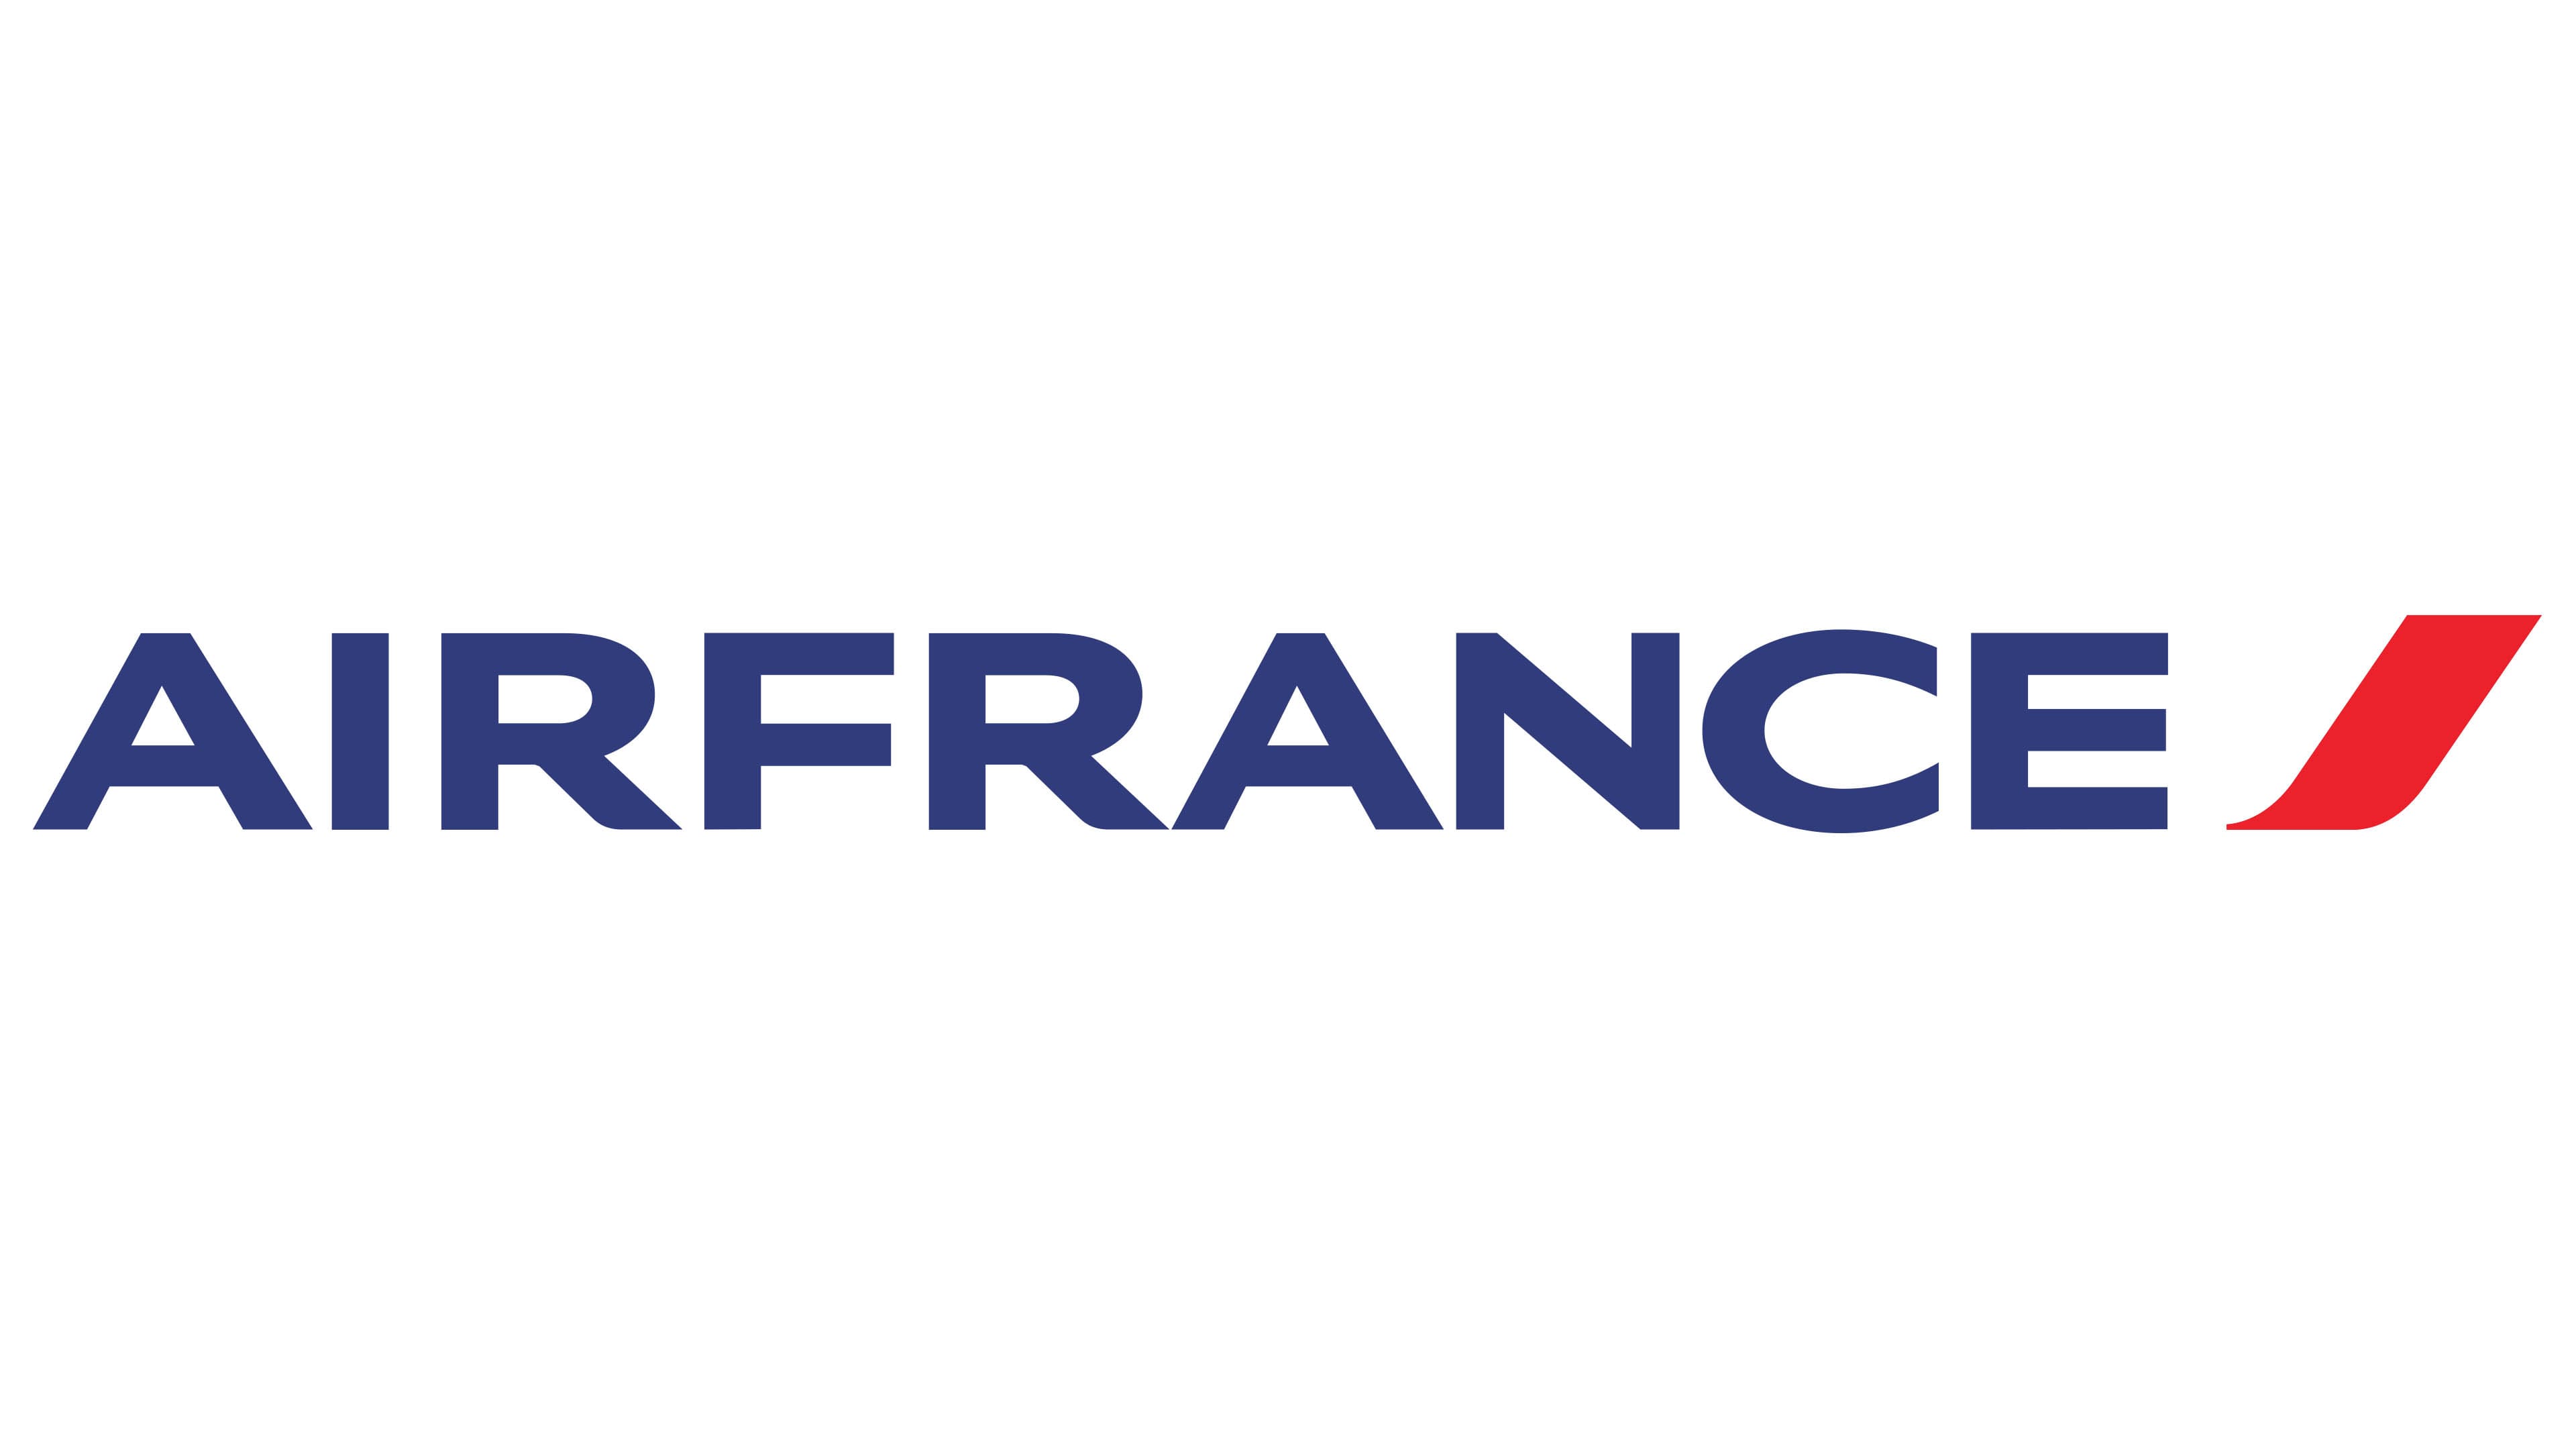 Air France Logo | The most famous brands and company logos in the ...